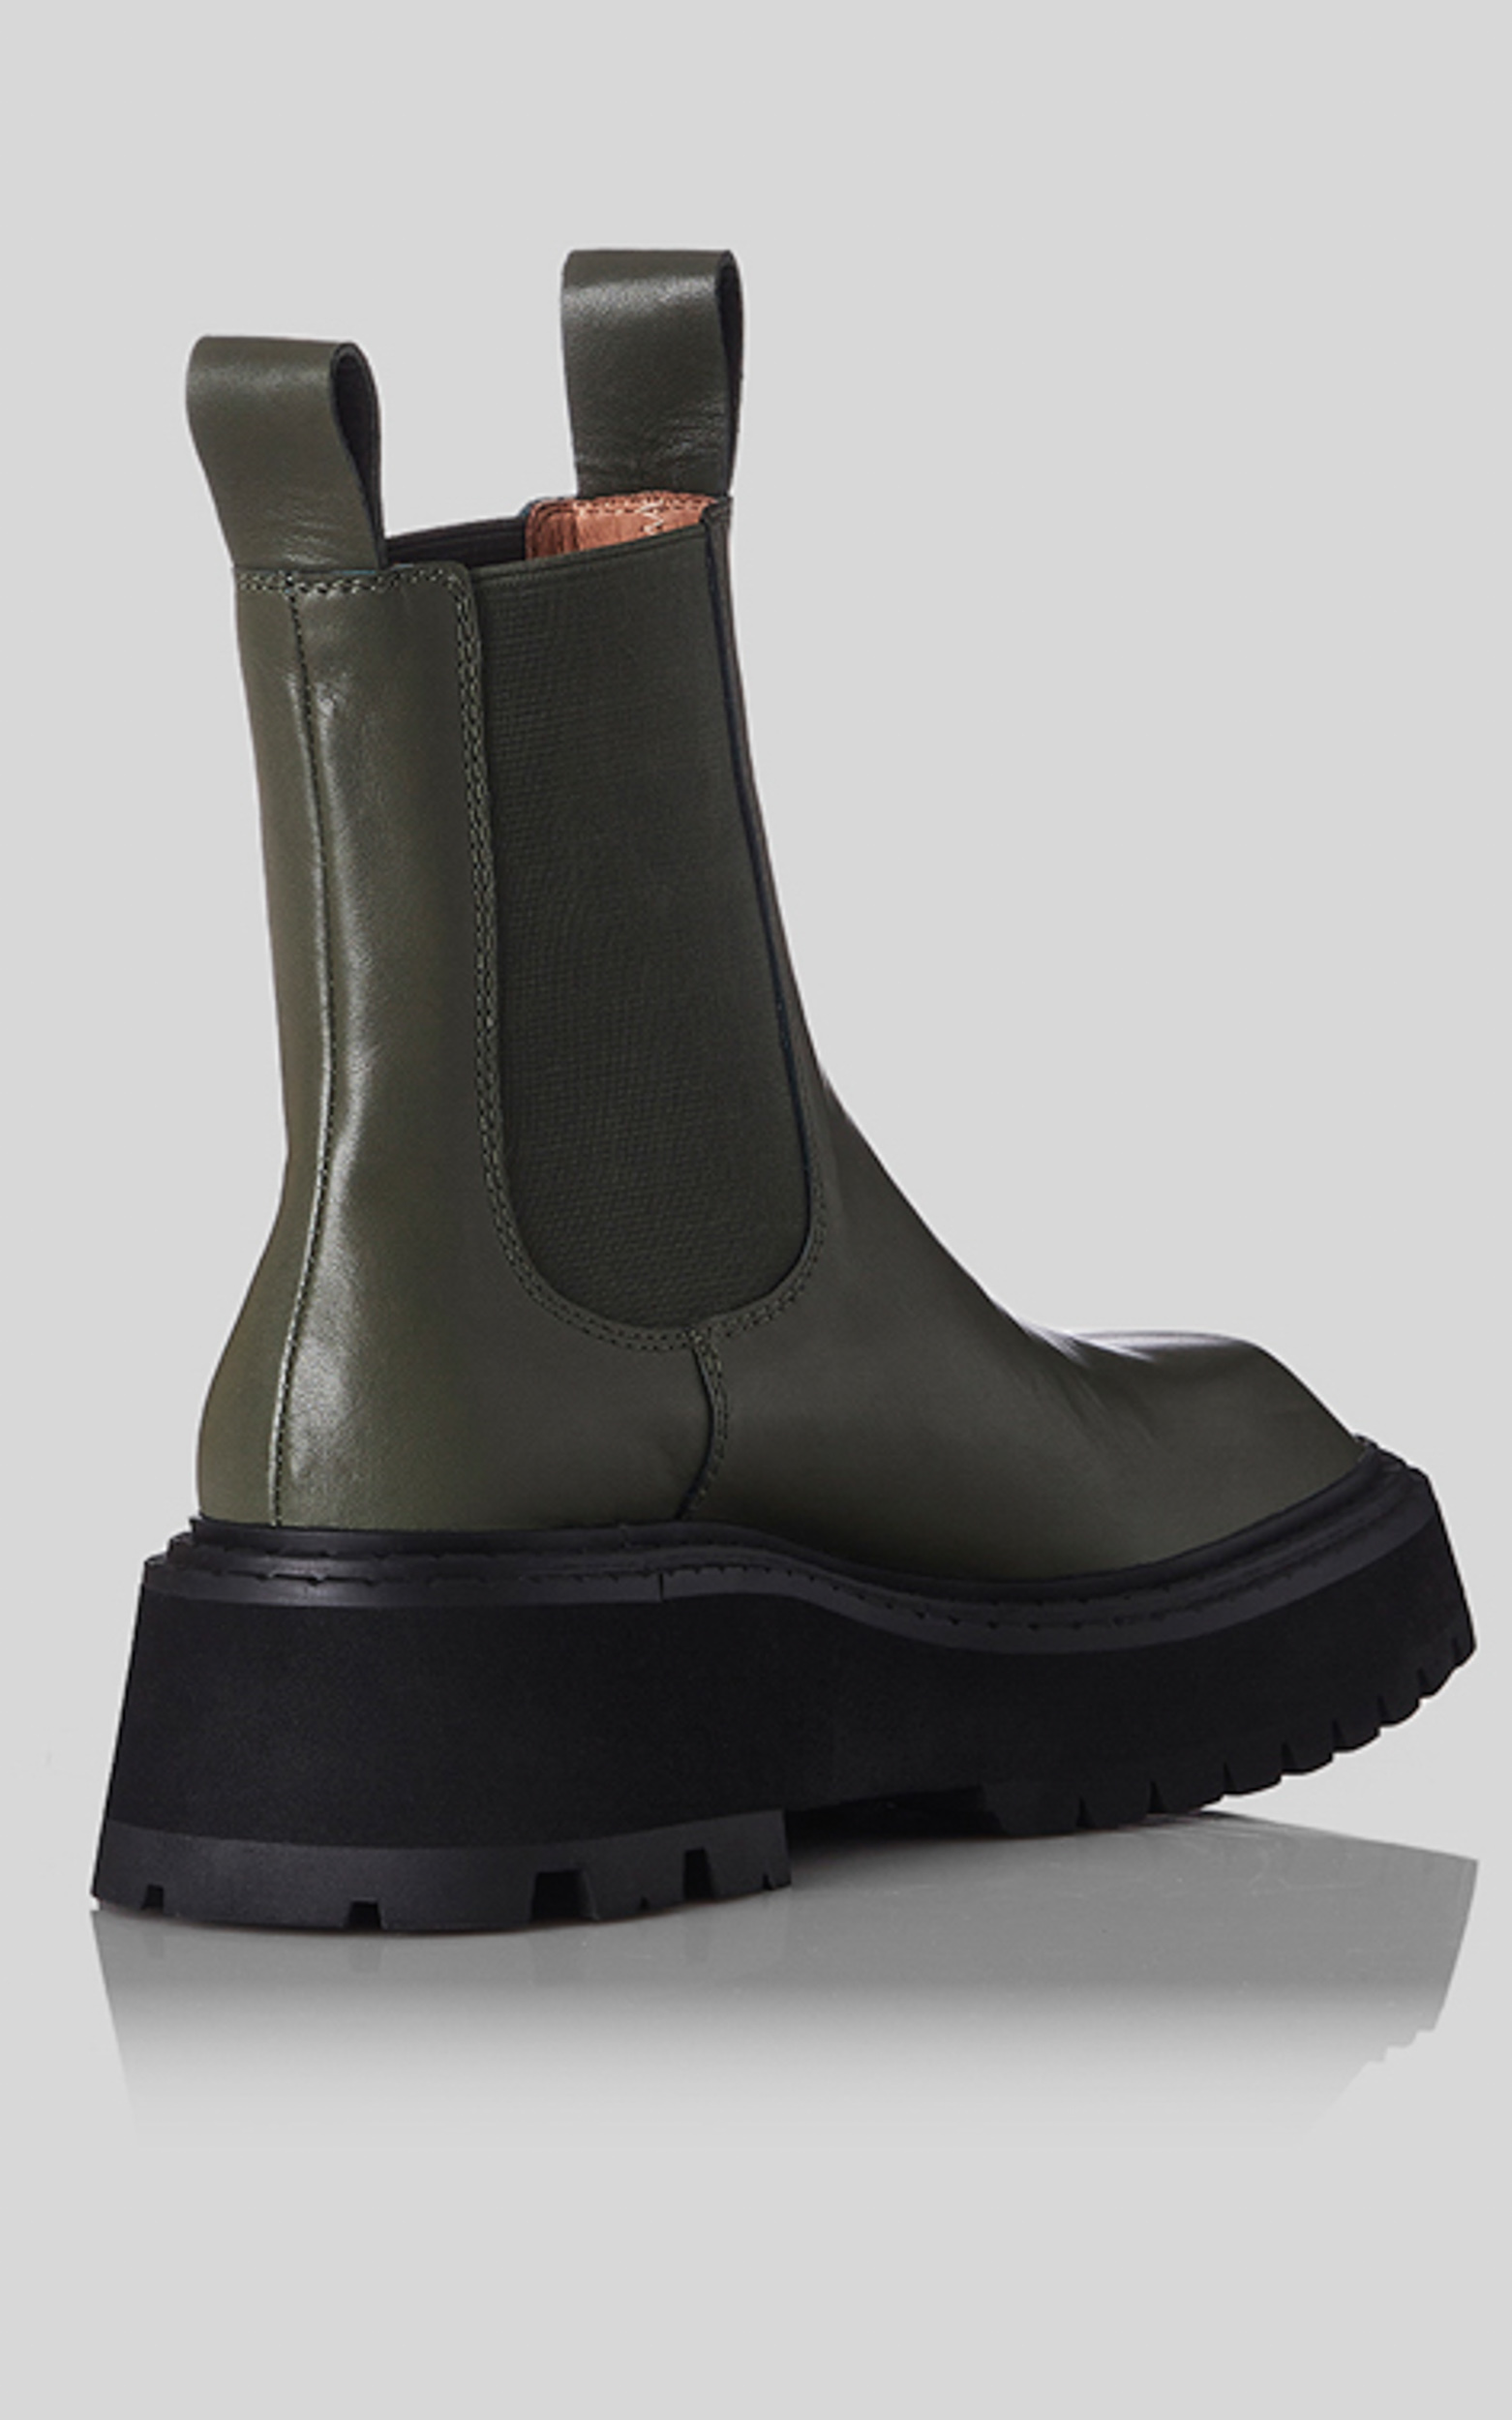 Alias Mae - Tess Boots in Olive Leather - 10, GRN1, hi-res image number null